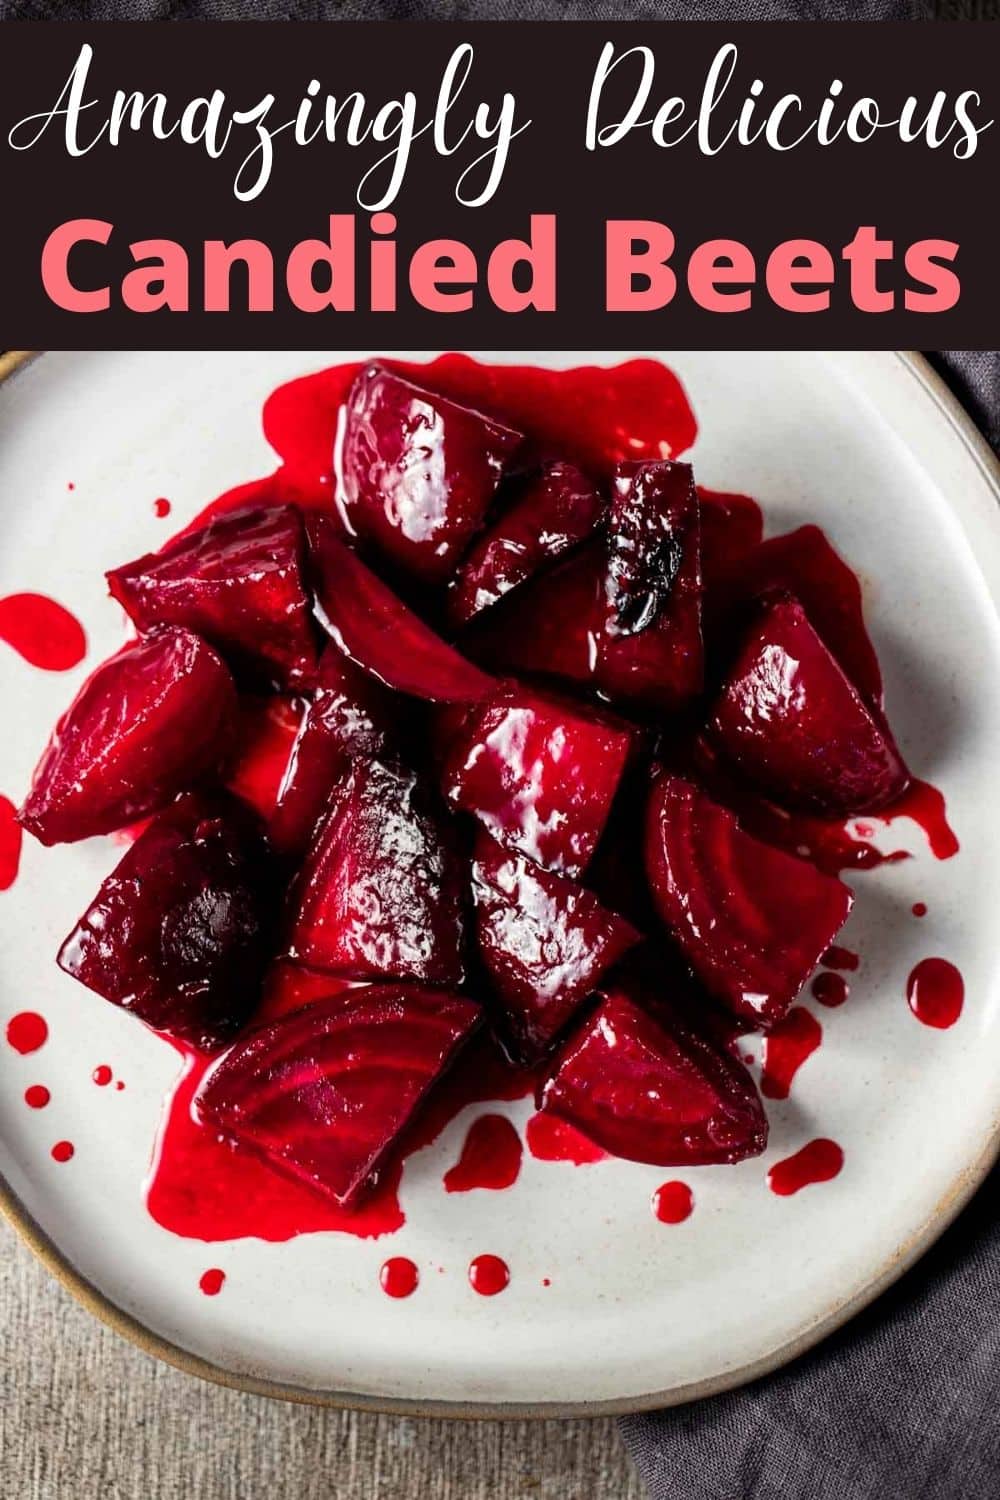 Candied Beets